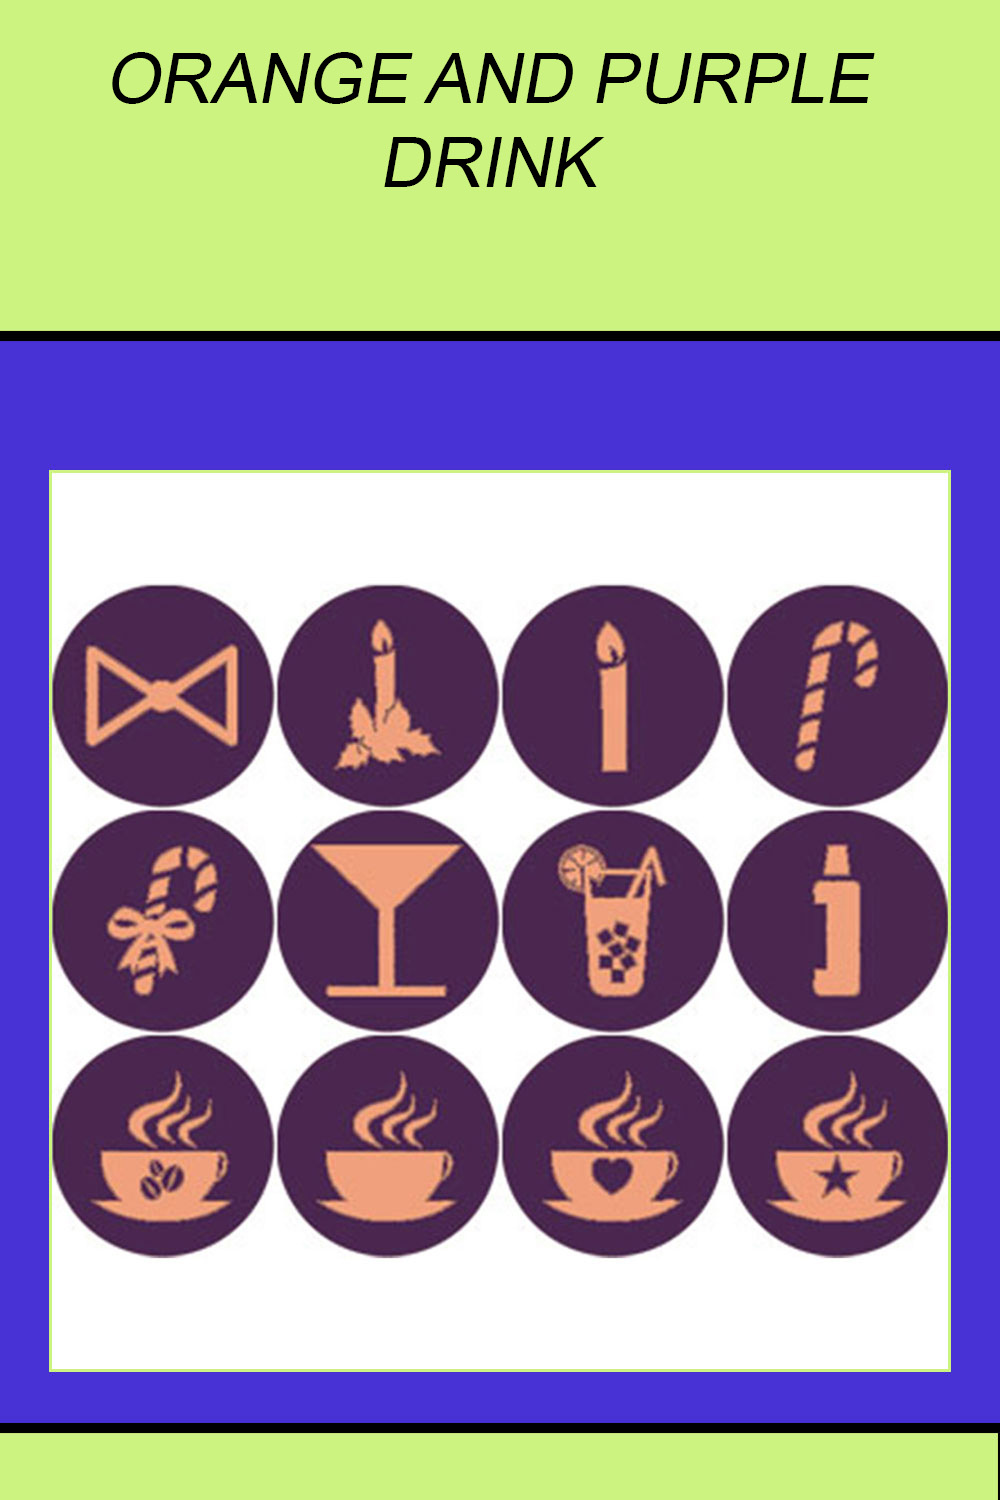 ORANGE AND PURPLE DRINK ROUND ICONS pinterest preview image.